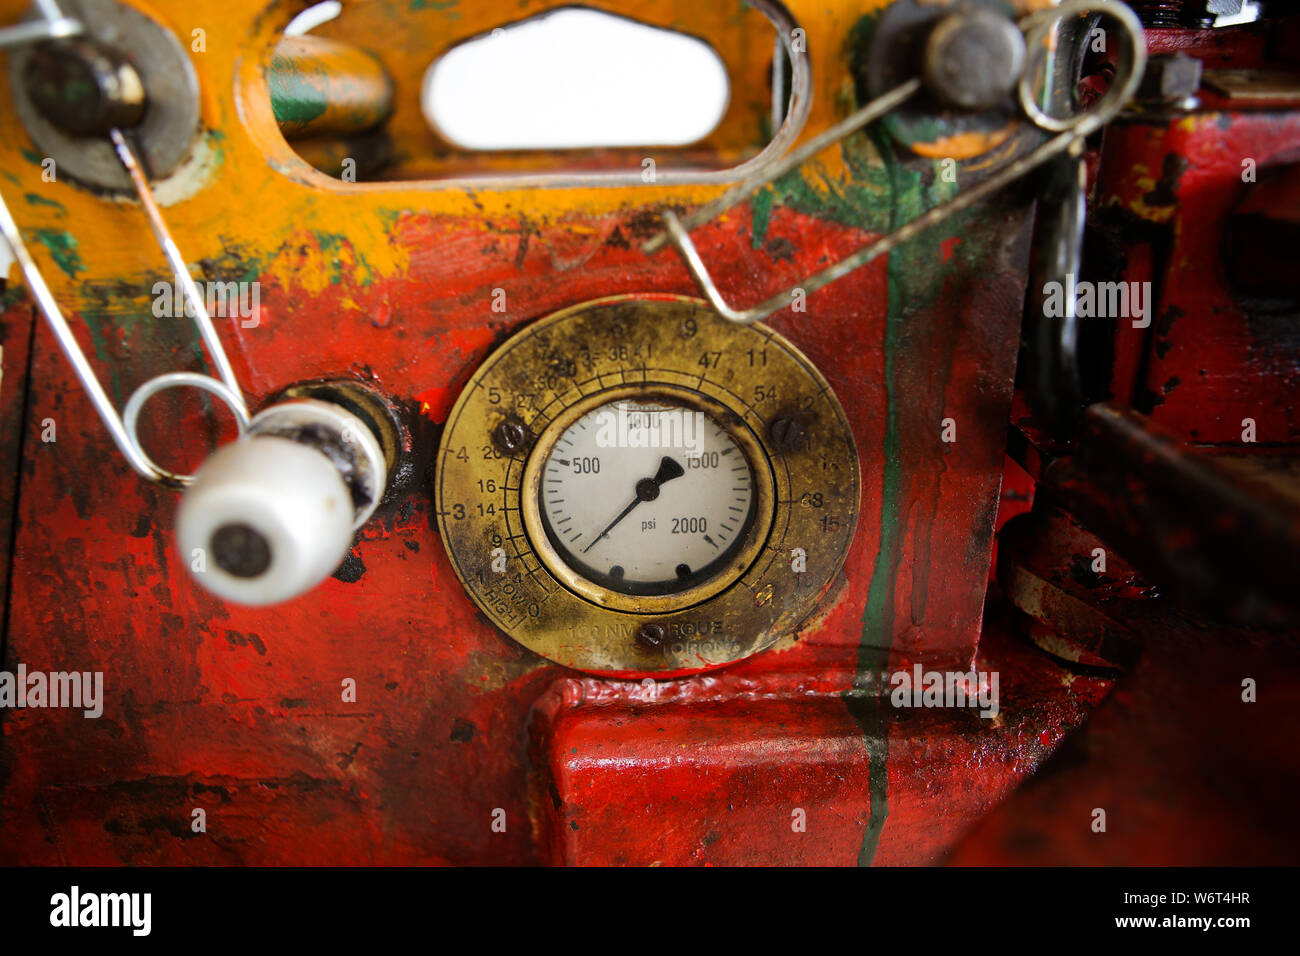 Details of a steampunk like old, dirty, colorful and rusty PSI manometer on an industrial heavy iron machinery Stock Photo